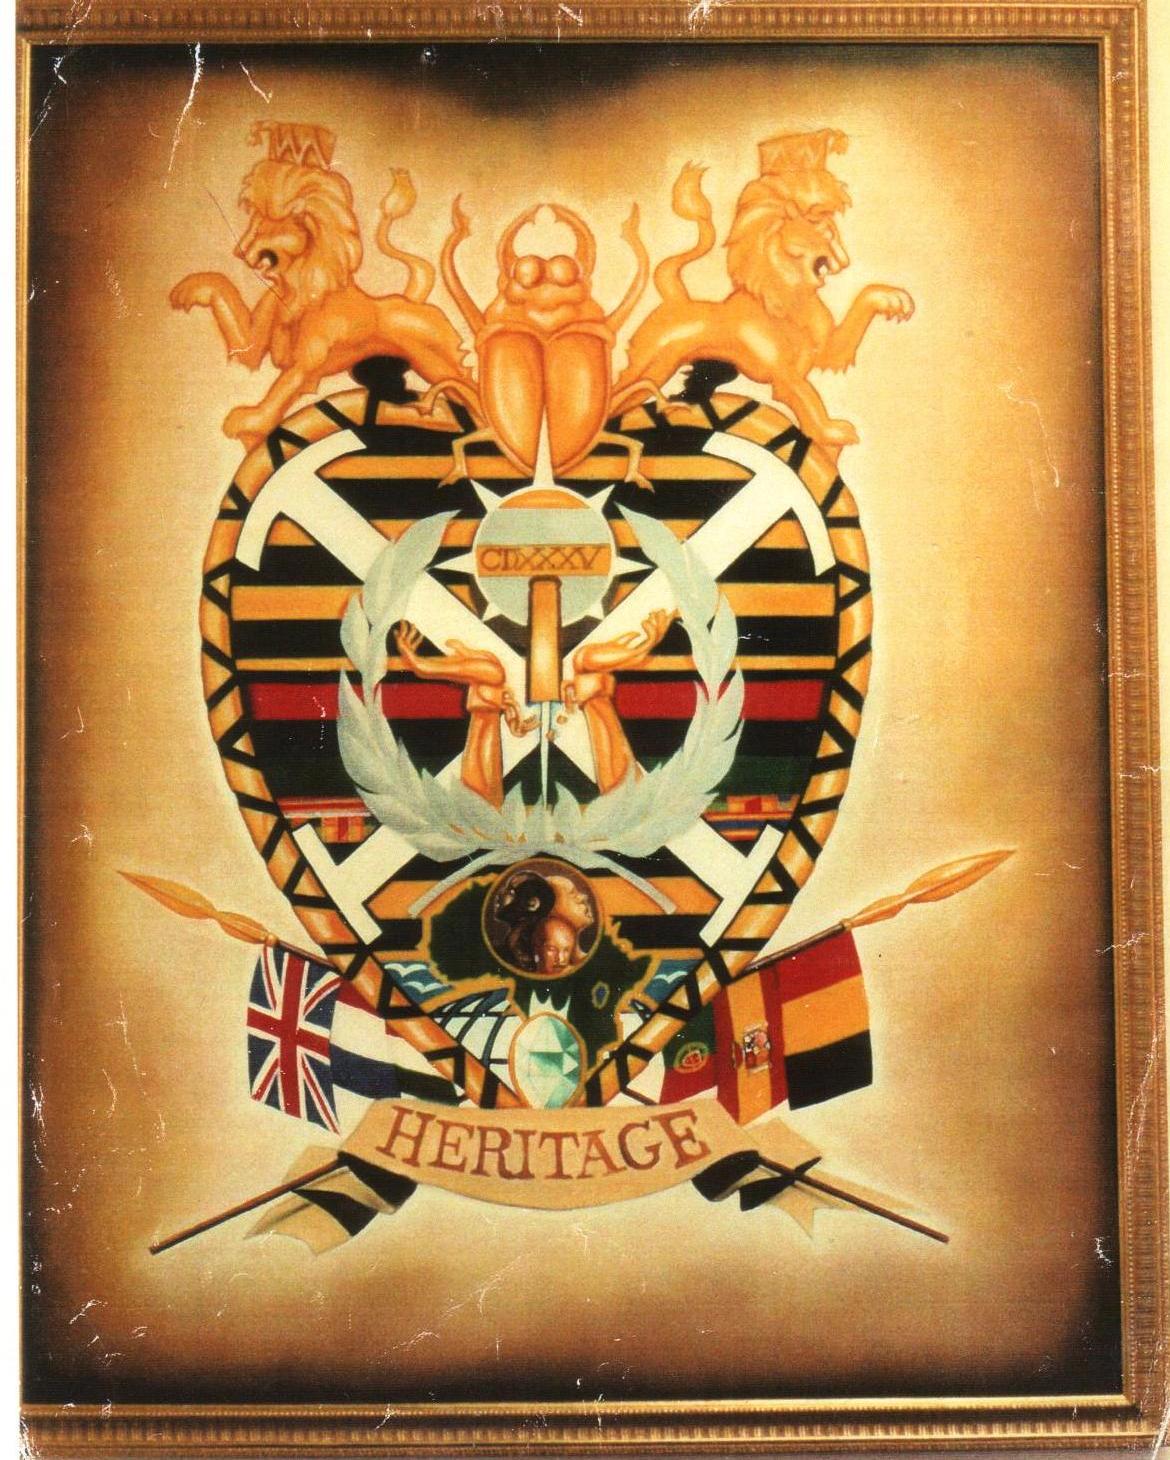 Heritage Crest - First African American Crest